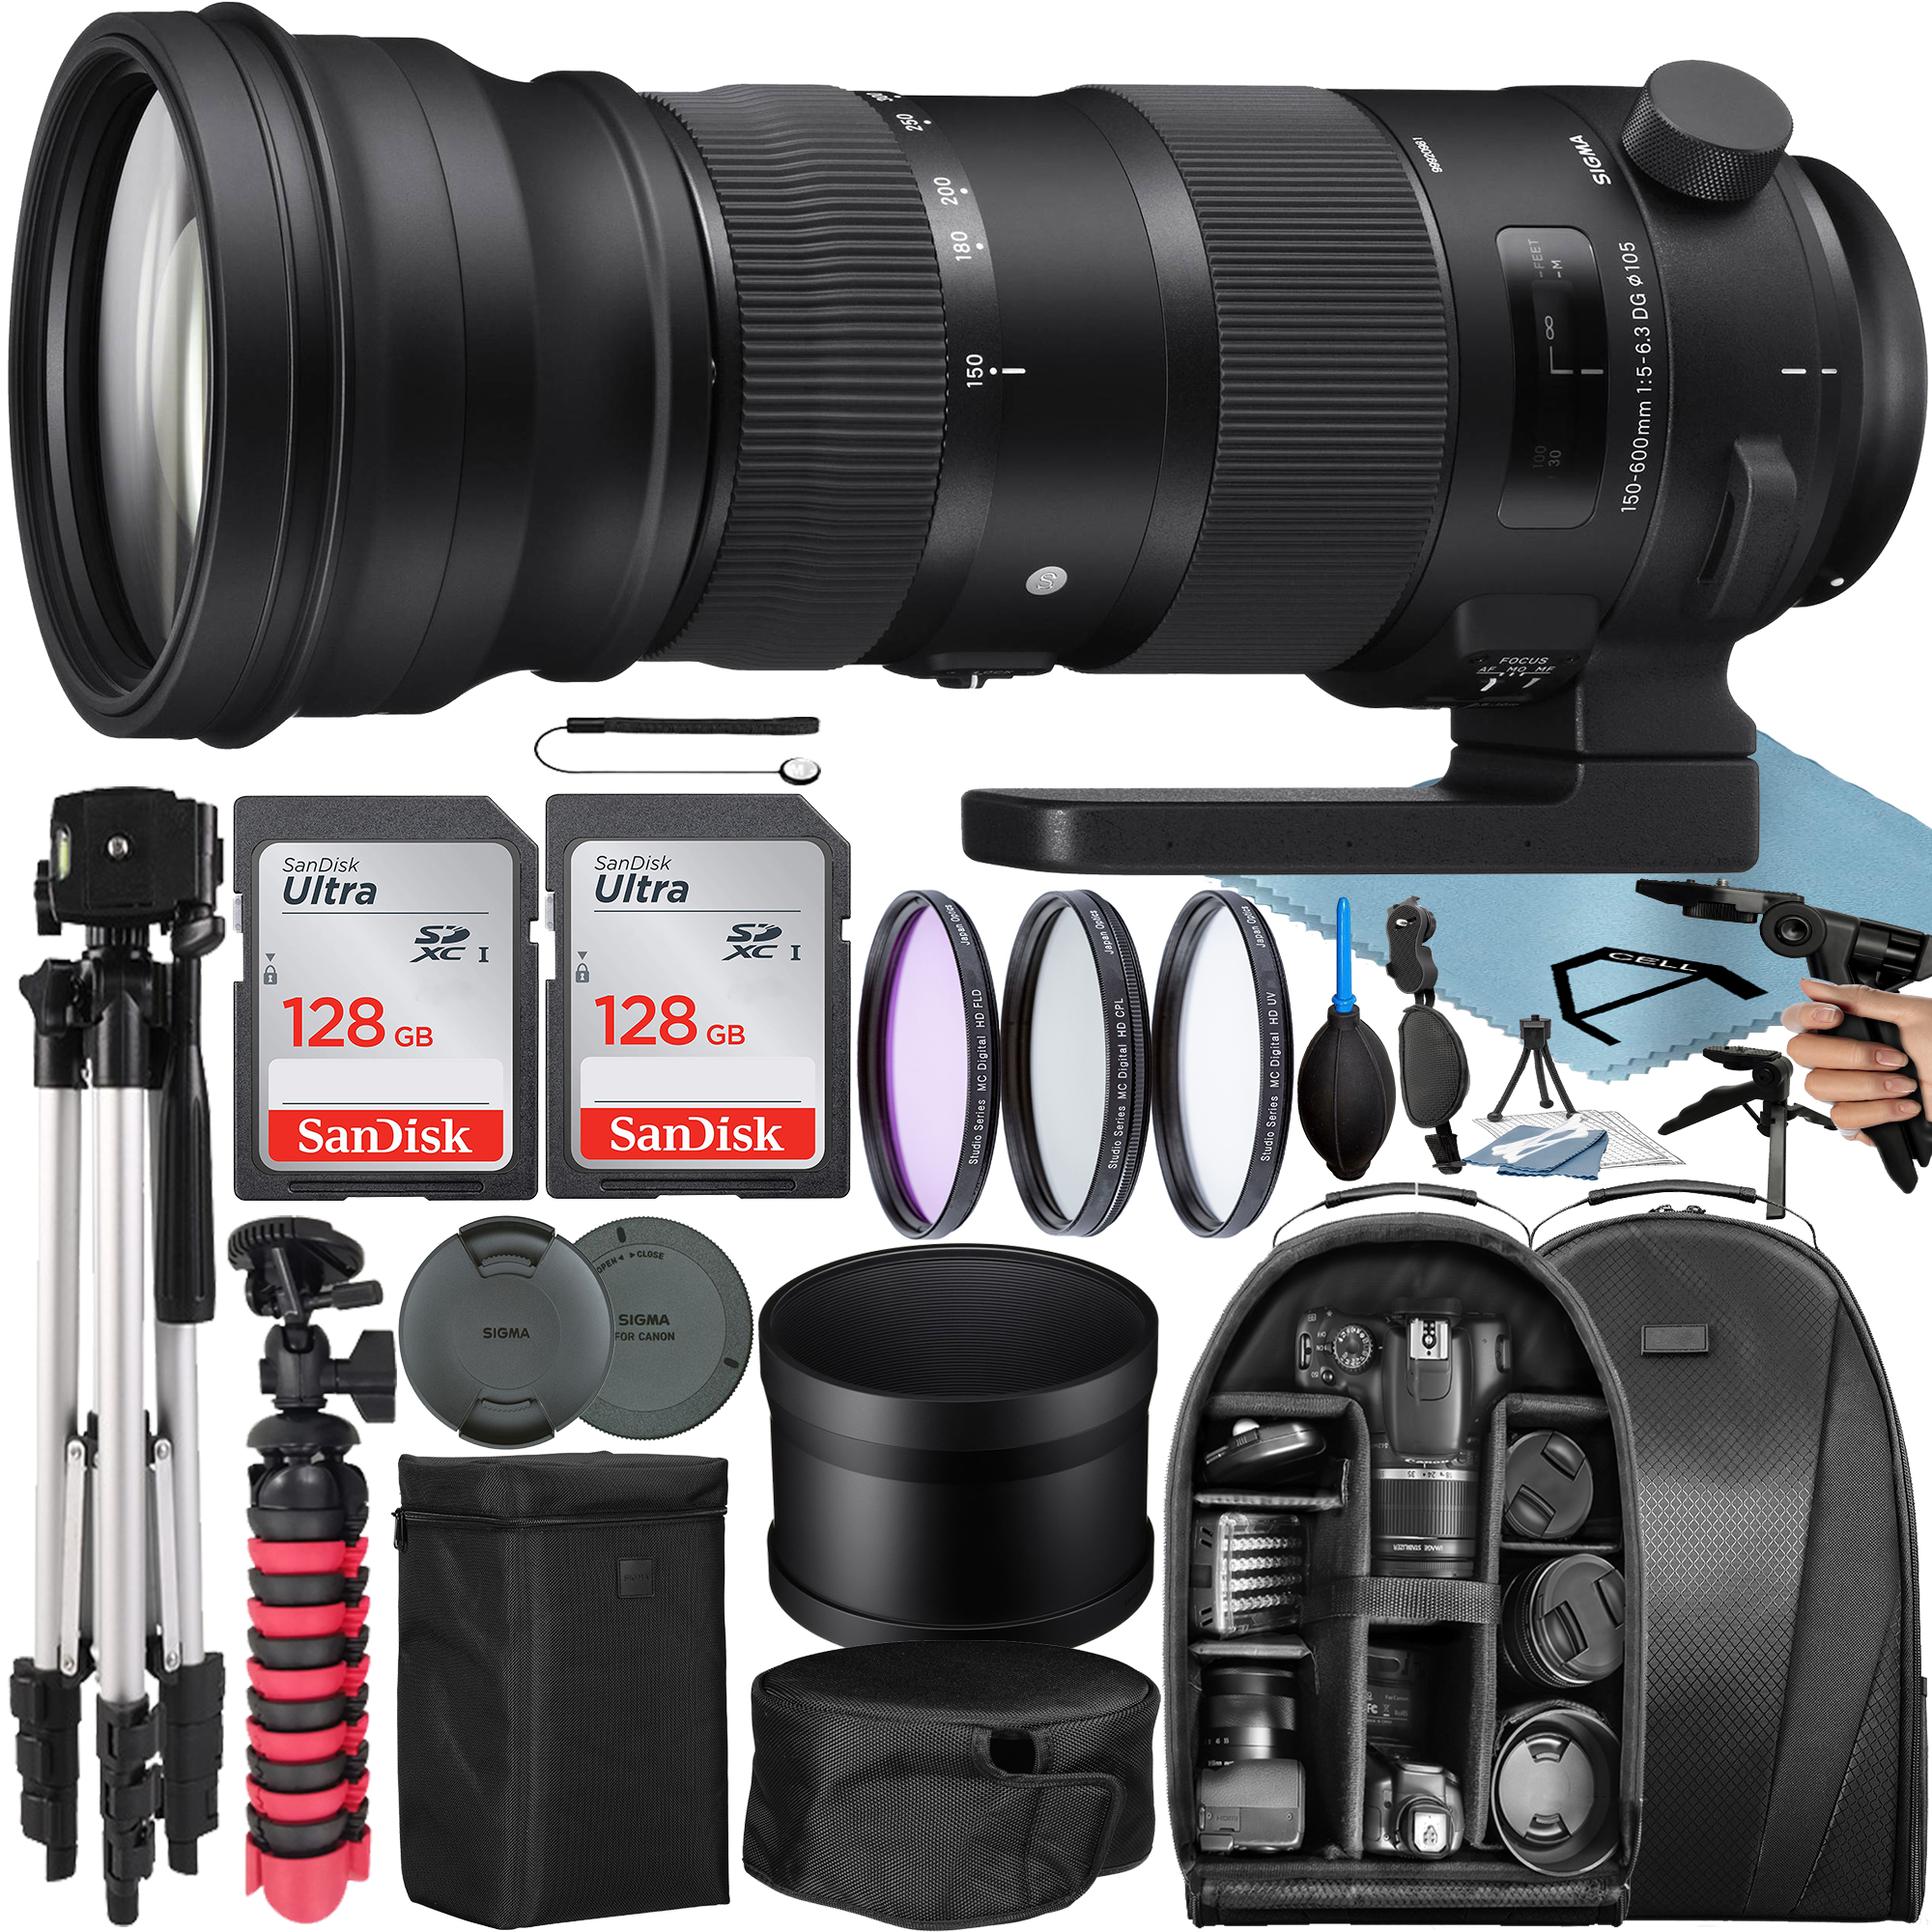 Sigma 150-600mm F/5-6.3 DG OS HSM Sports Lens for Canon EF with 2 Pack 128GB SanDisk Memory Card + Tripod + Backpack + A-Cell Accessory Bundle